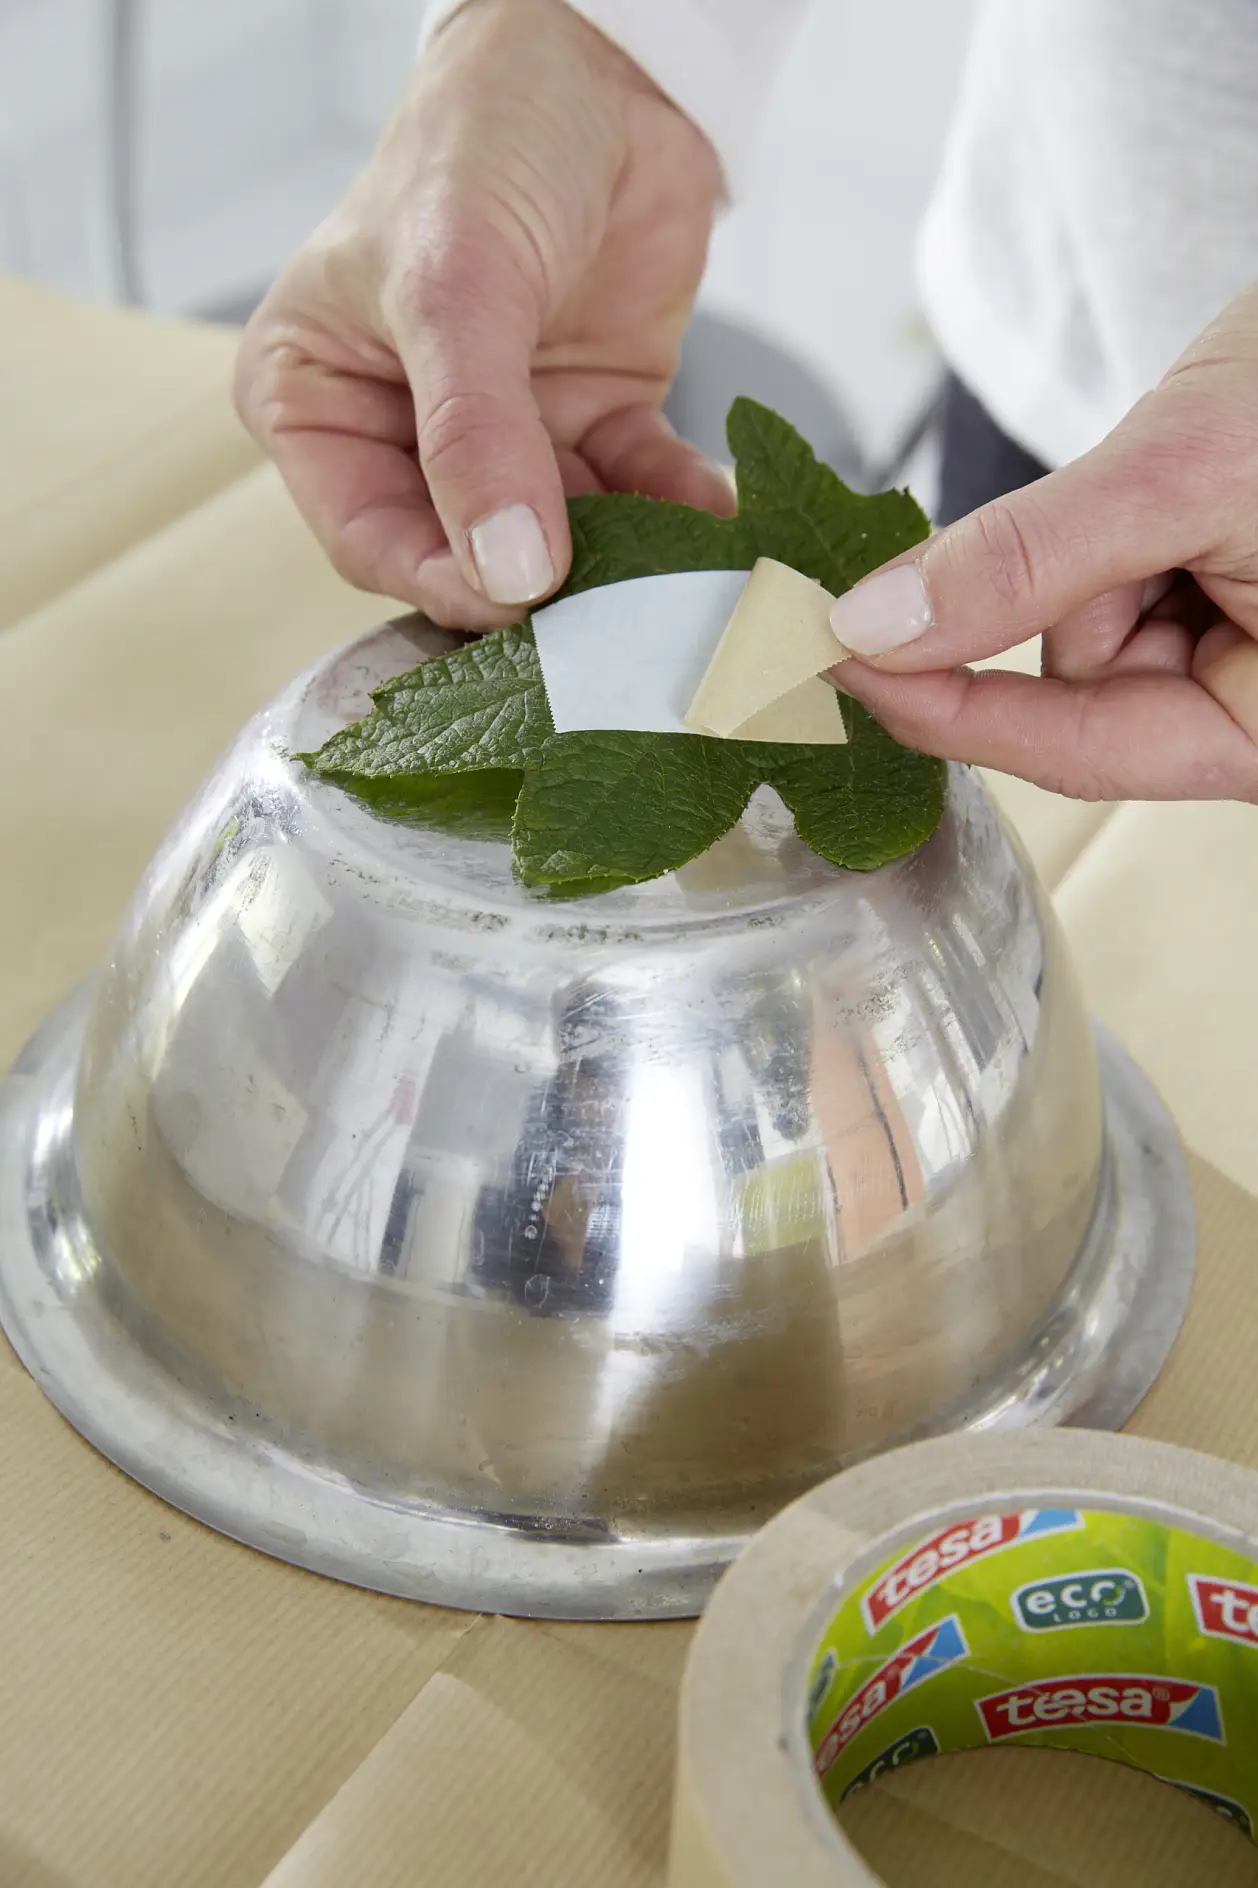 Fix the leaf to the underside of the smaller bowl, which is to sustain the inner form.